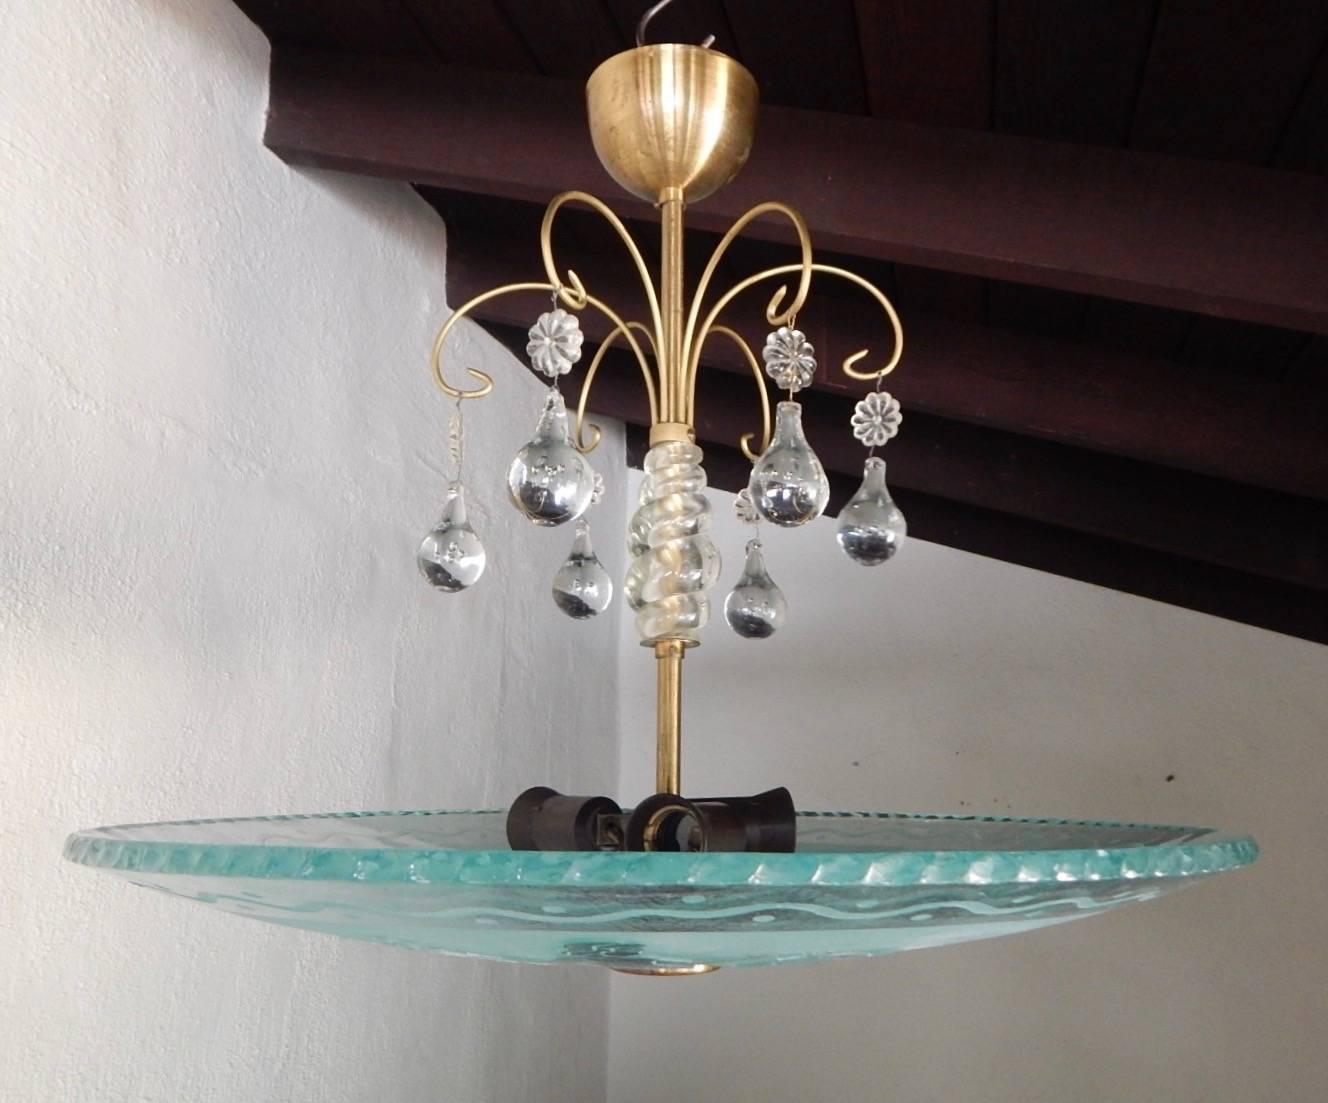 Mid-20th Century Swedish Etched Glass Fixture with Neoclassical Motifs by Orrefors, 1940s